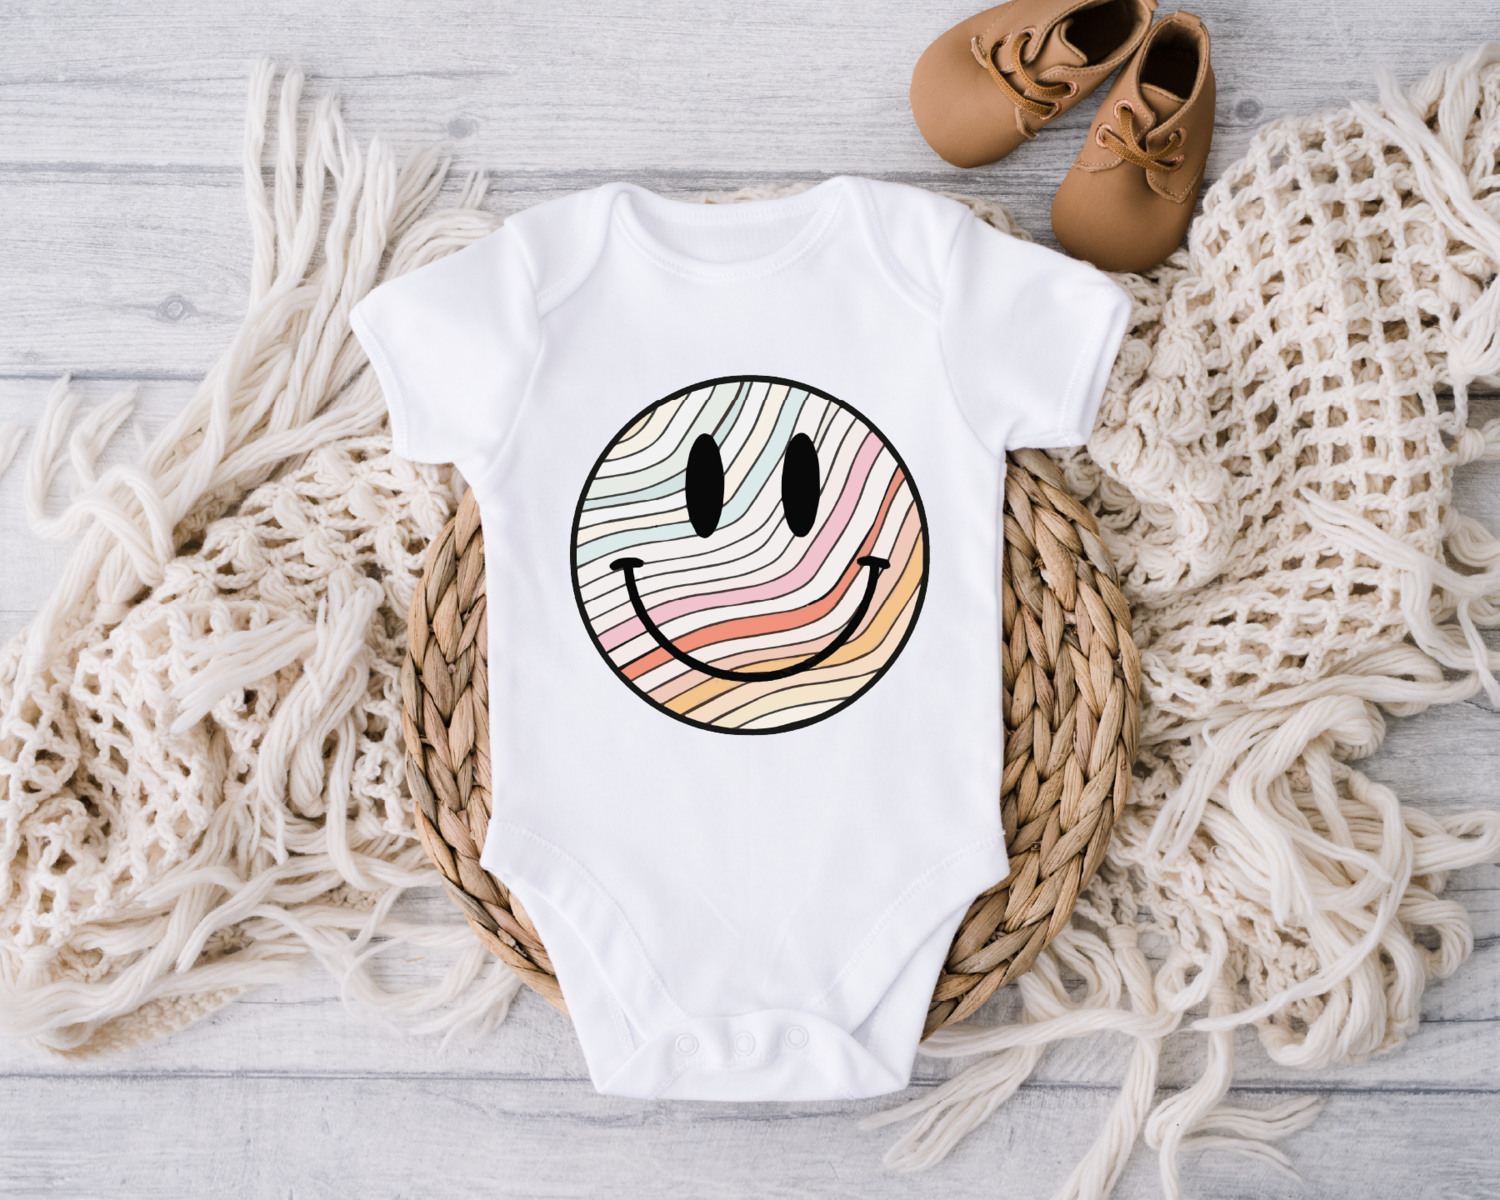 Colorful Smile Baby Onesie, Cute Happy Face Baby Gift, Baby Shower Gift Boy Girl, Newborn Baby Gift